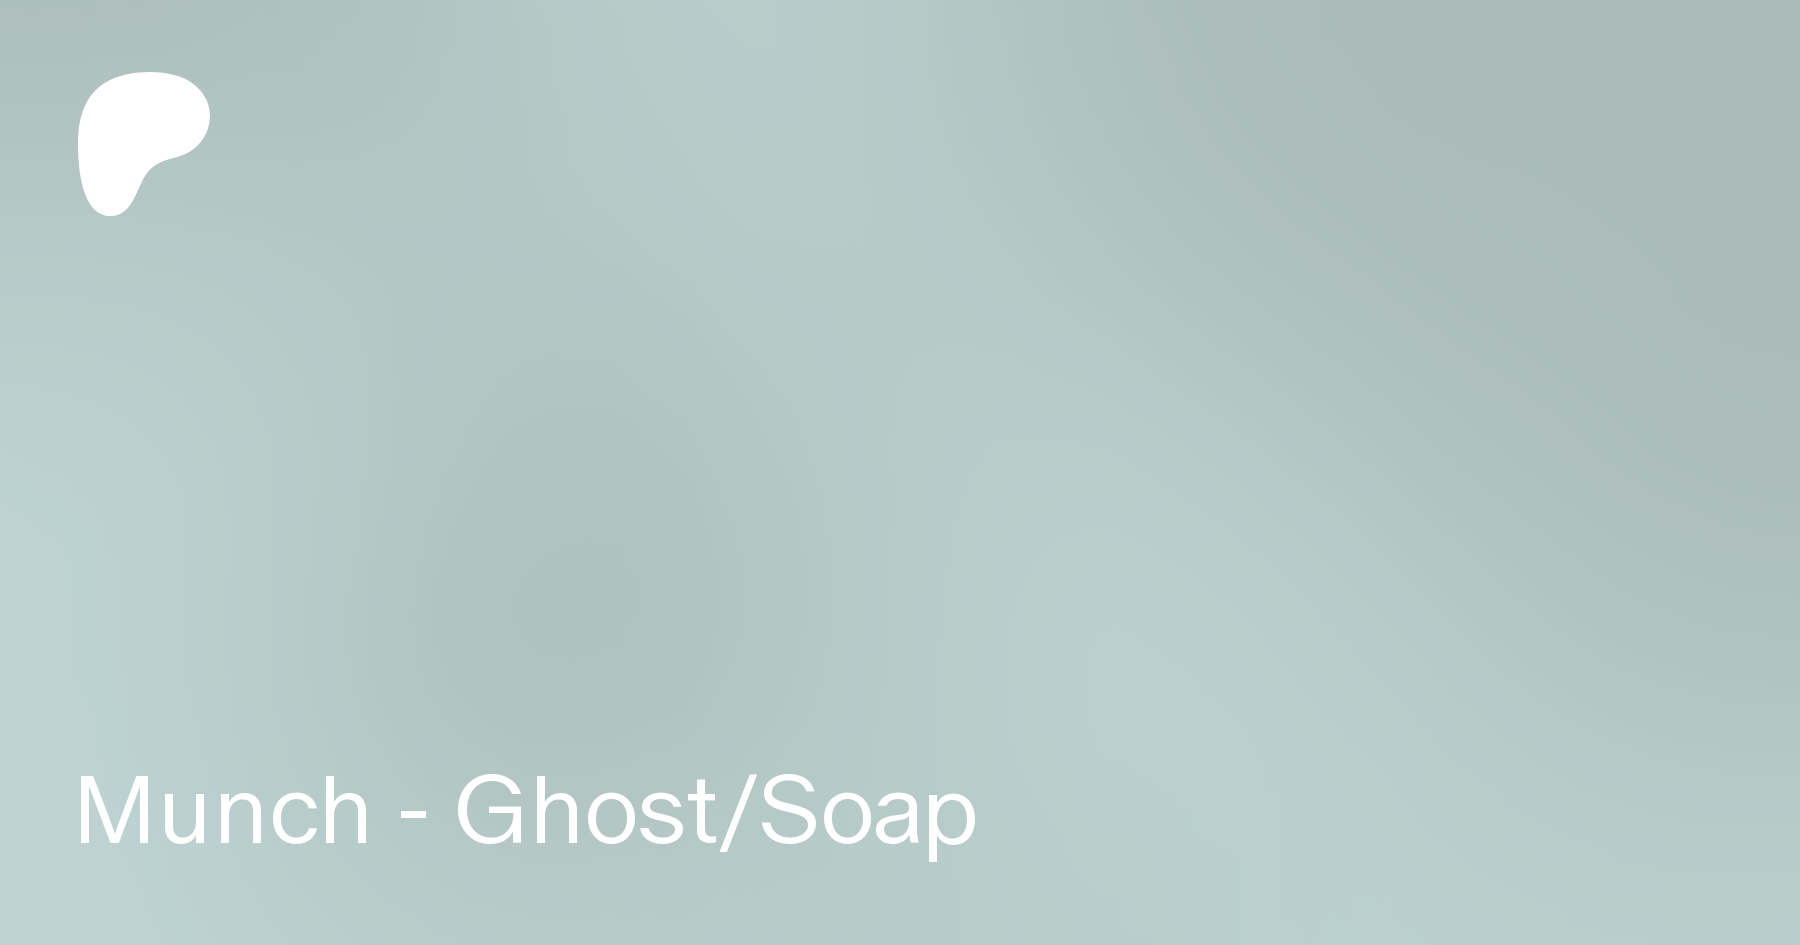 Munch - Ghost/Soap